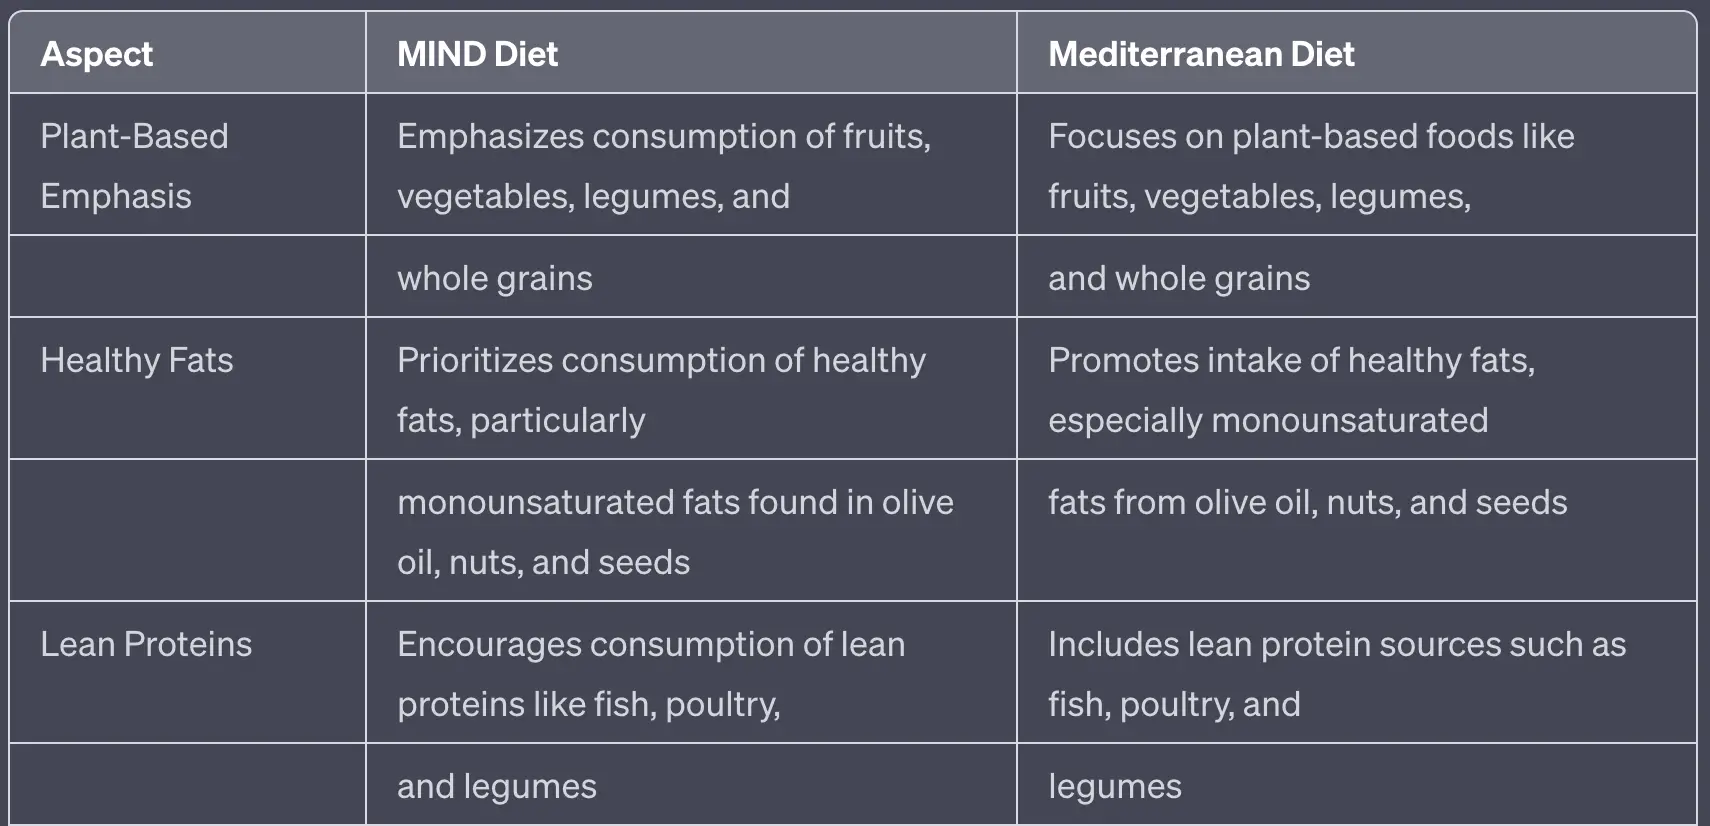 Table A: Similarities between the MIND diet and Mediterranean Diet